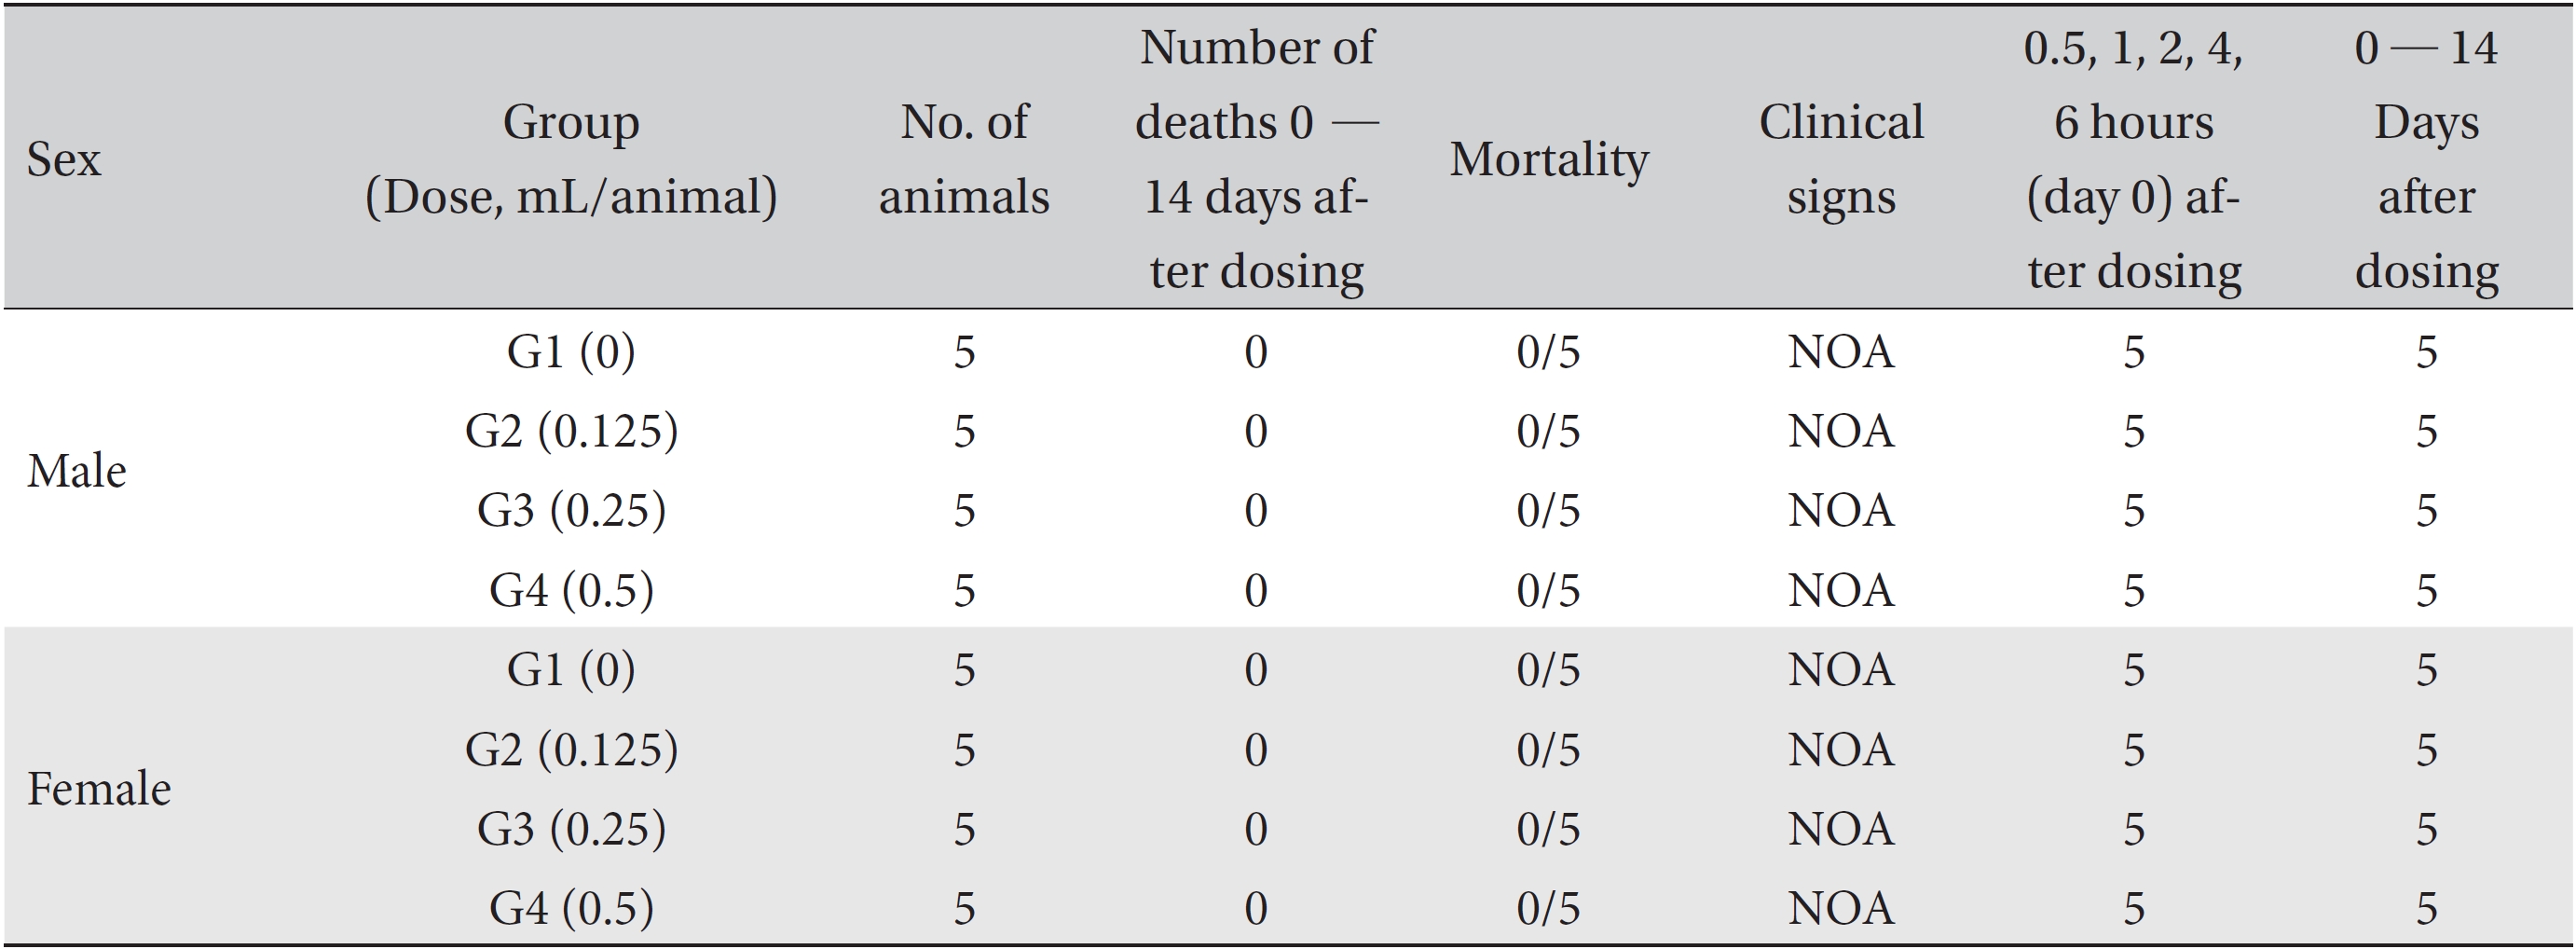 Summary of mortality and clinical signs